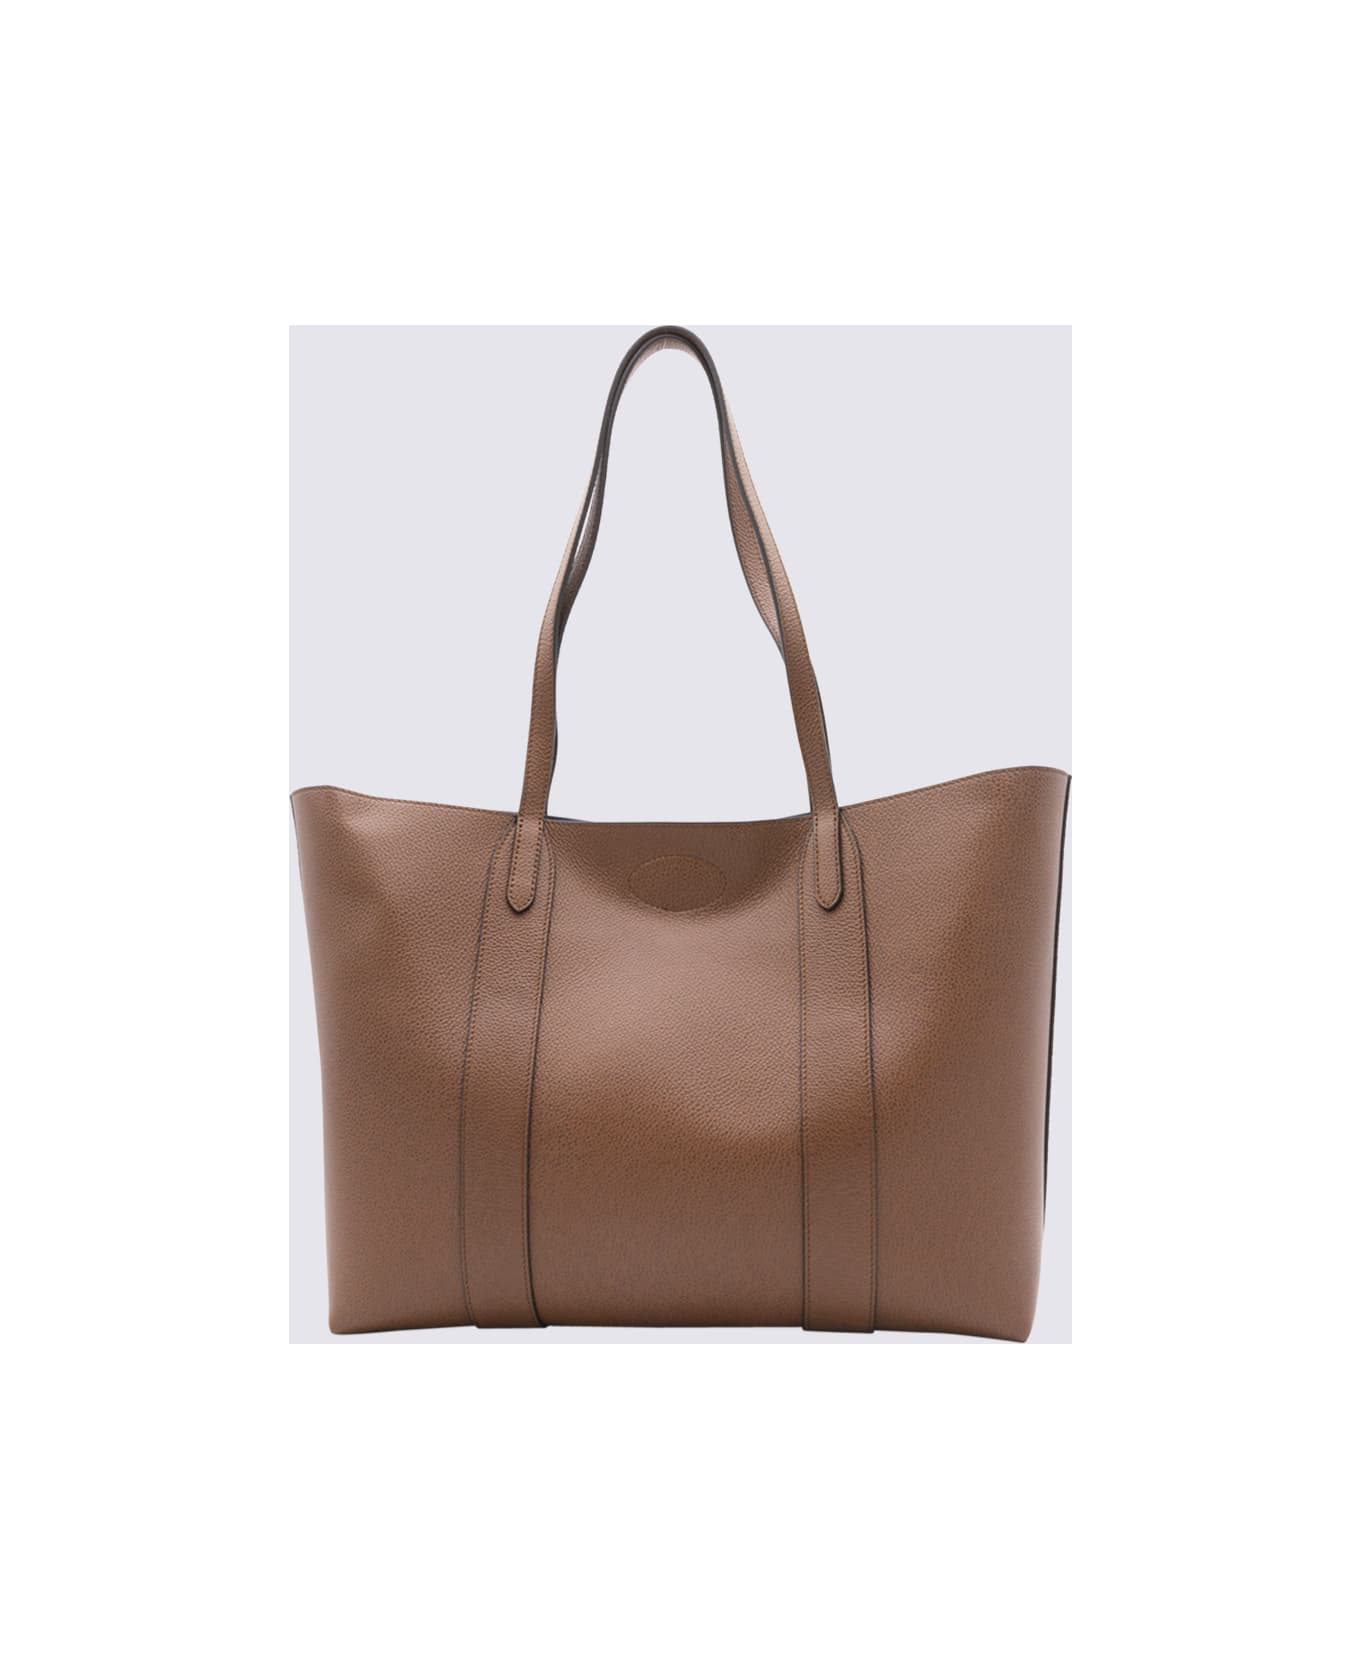 Mulberry Brown Leather Tote Bag - OAK トートバッグ